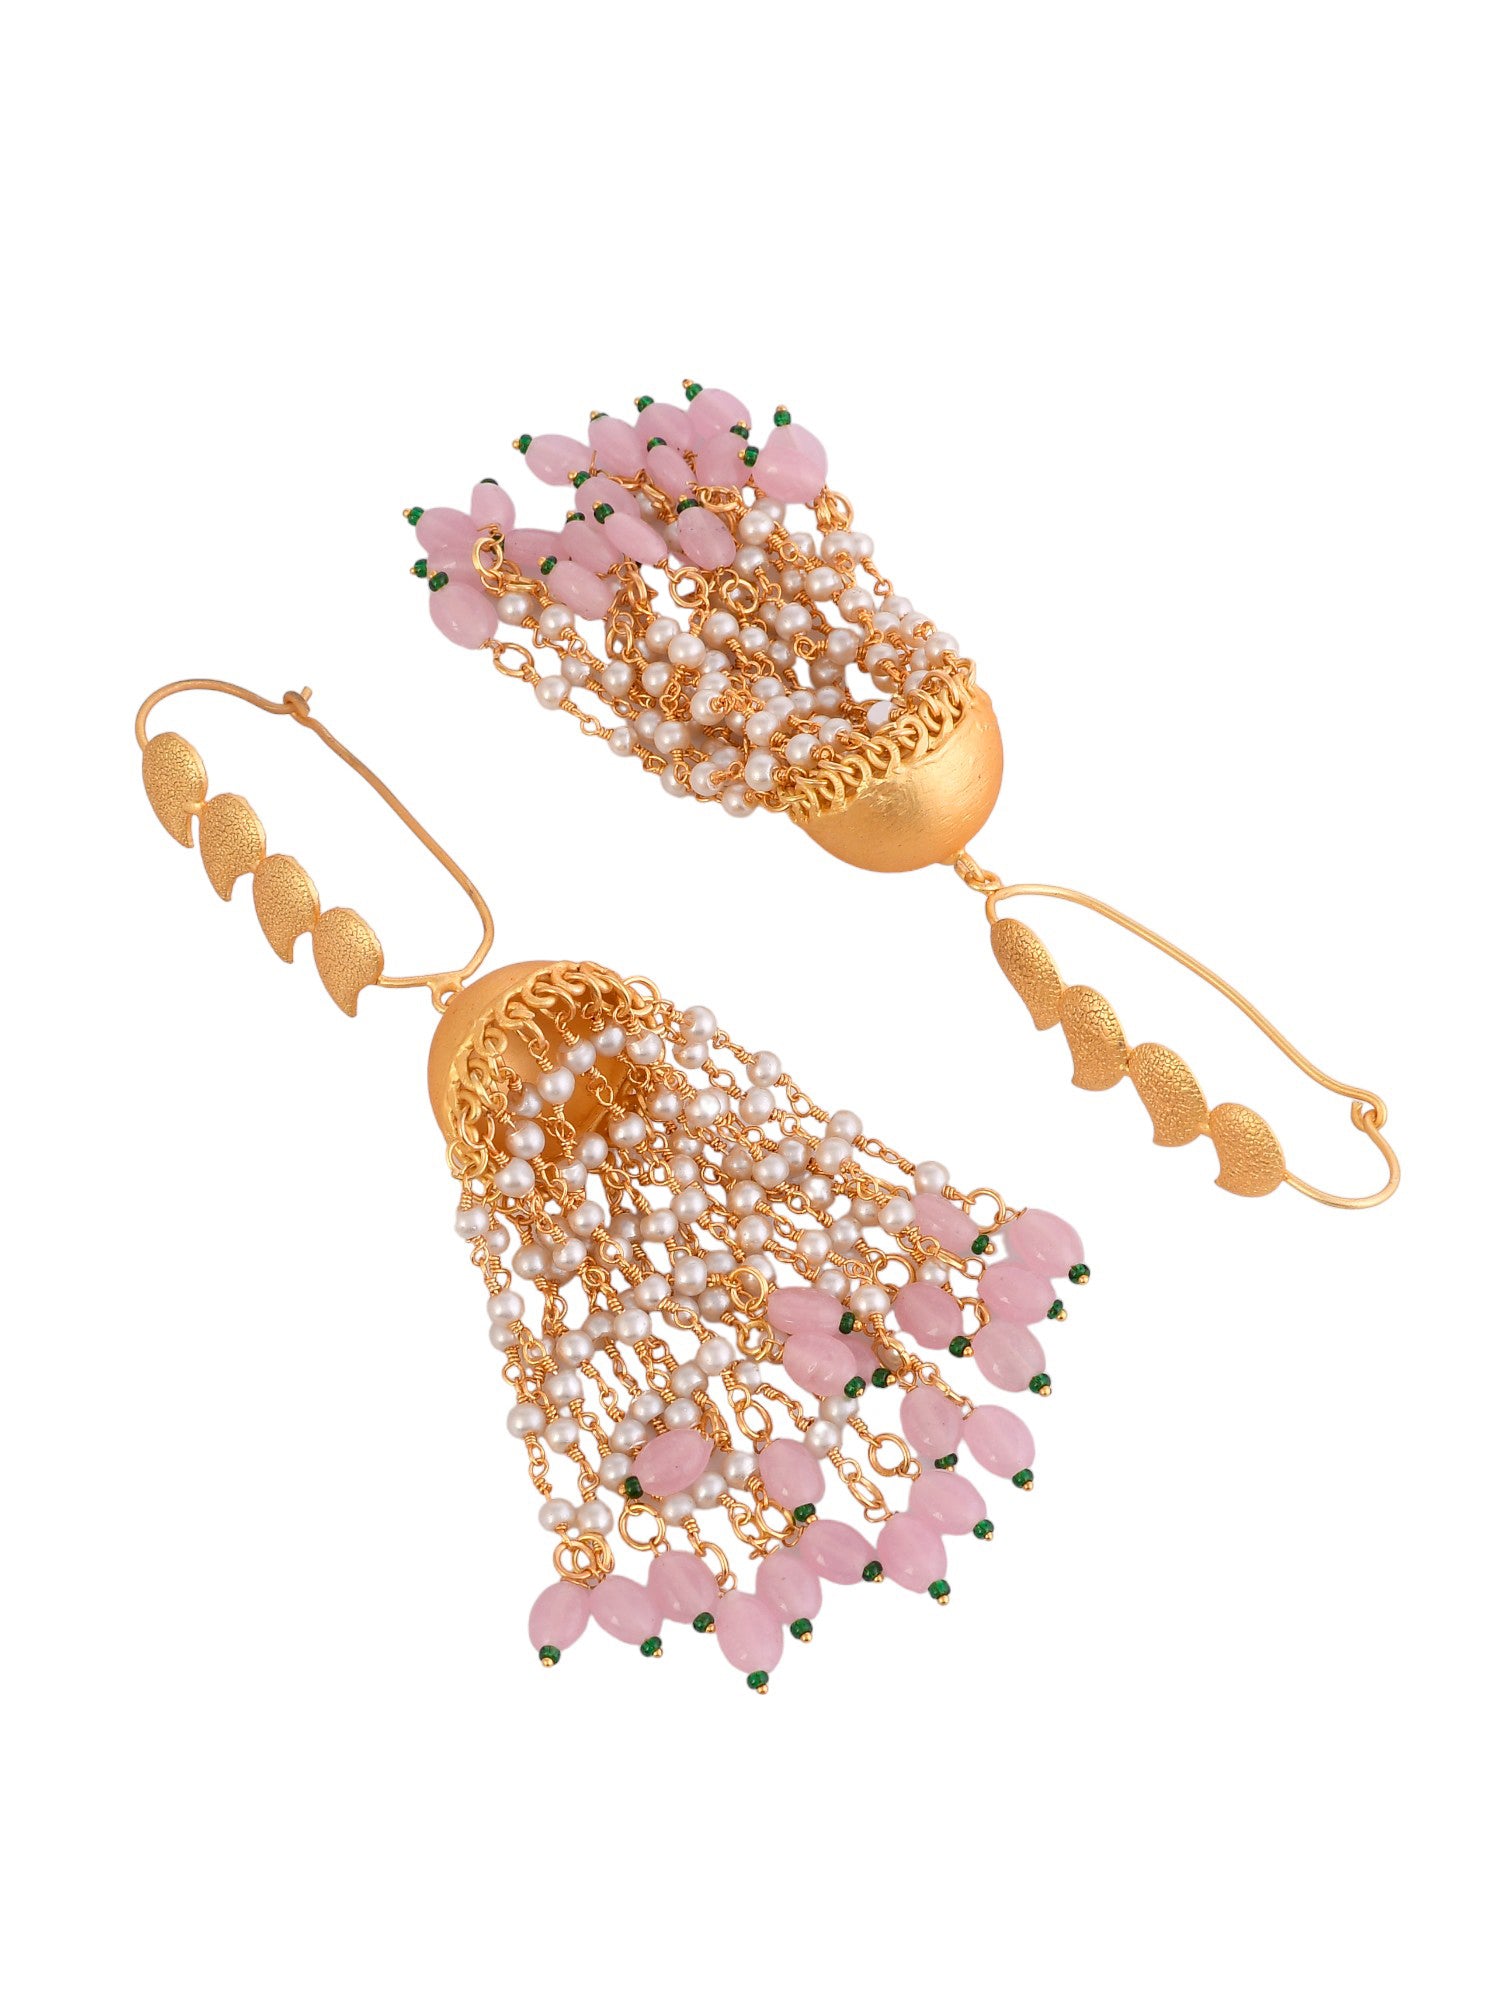 Elegant Gold-plates Jhumka Earrings with long pearls chain